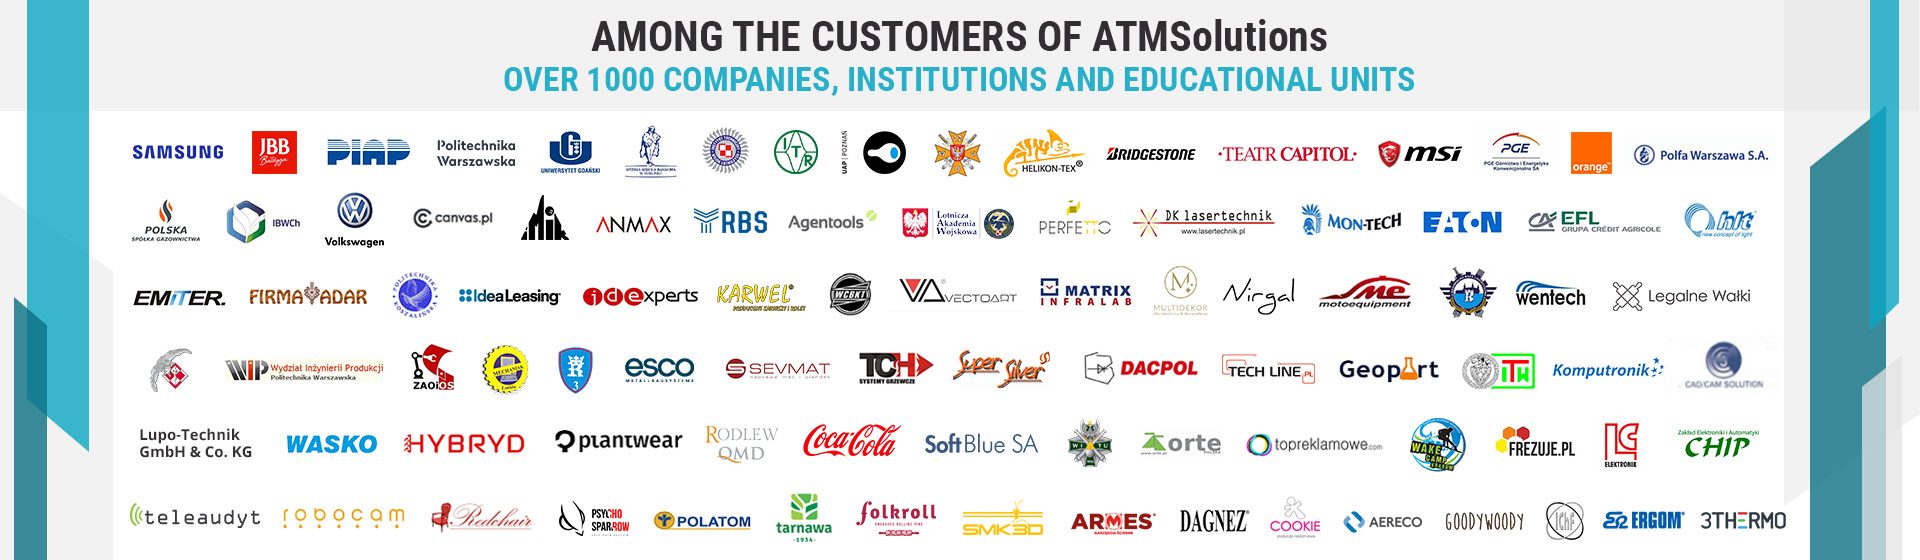 Over 1,000 companies, institutions and educational units among ATMSolutions customers